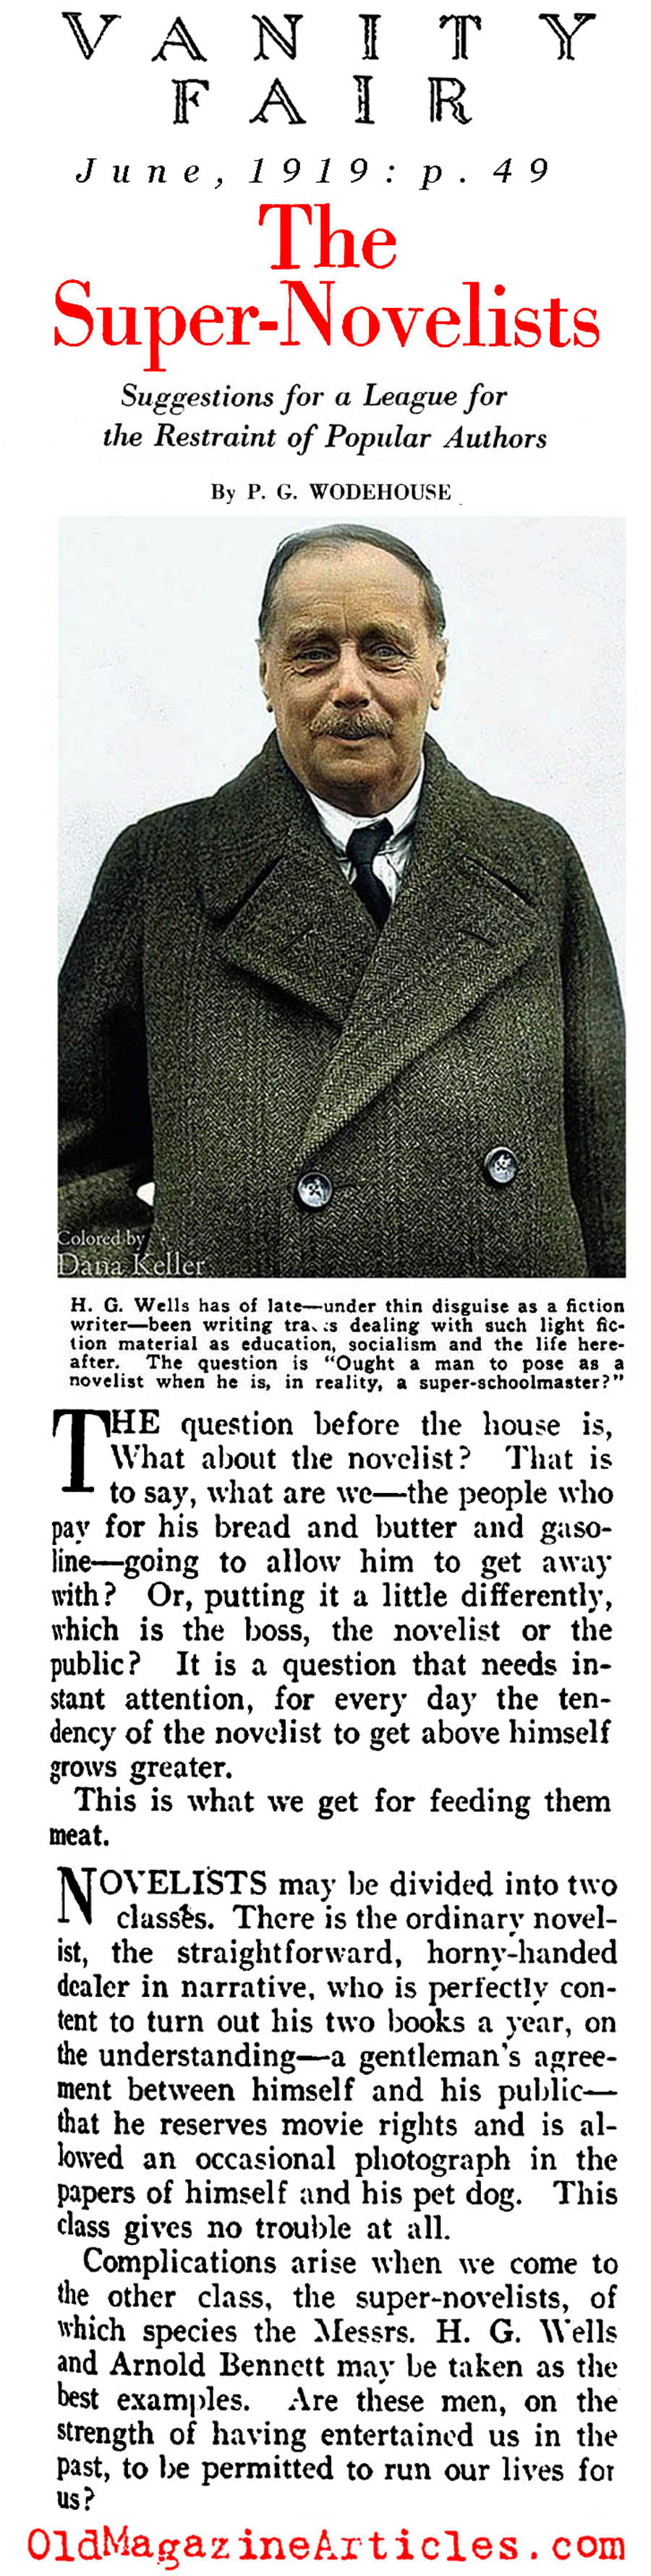 ''The Attack of the Super Novelists'' (Vanity Fair, 1919)